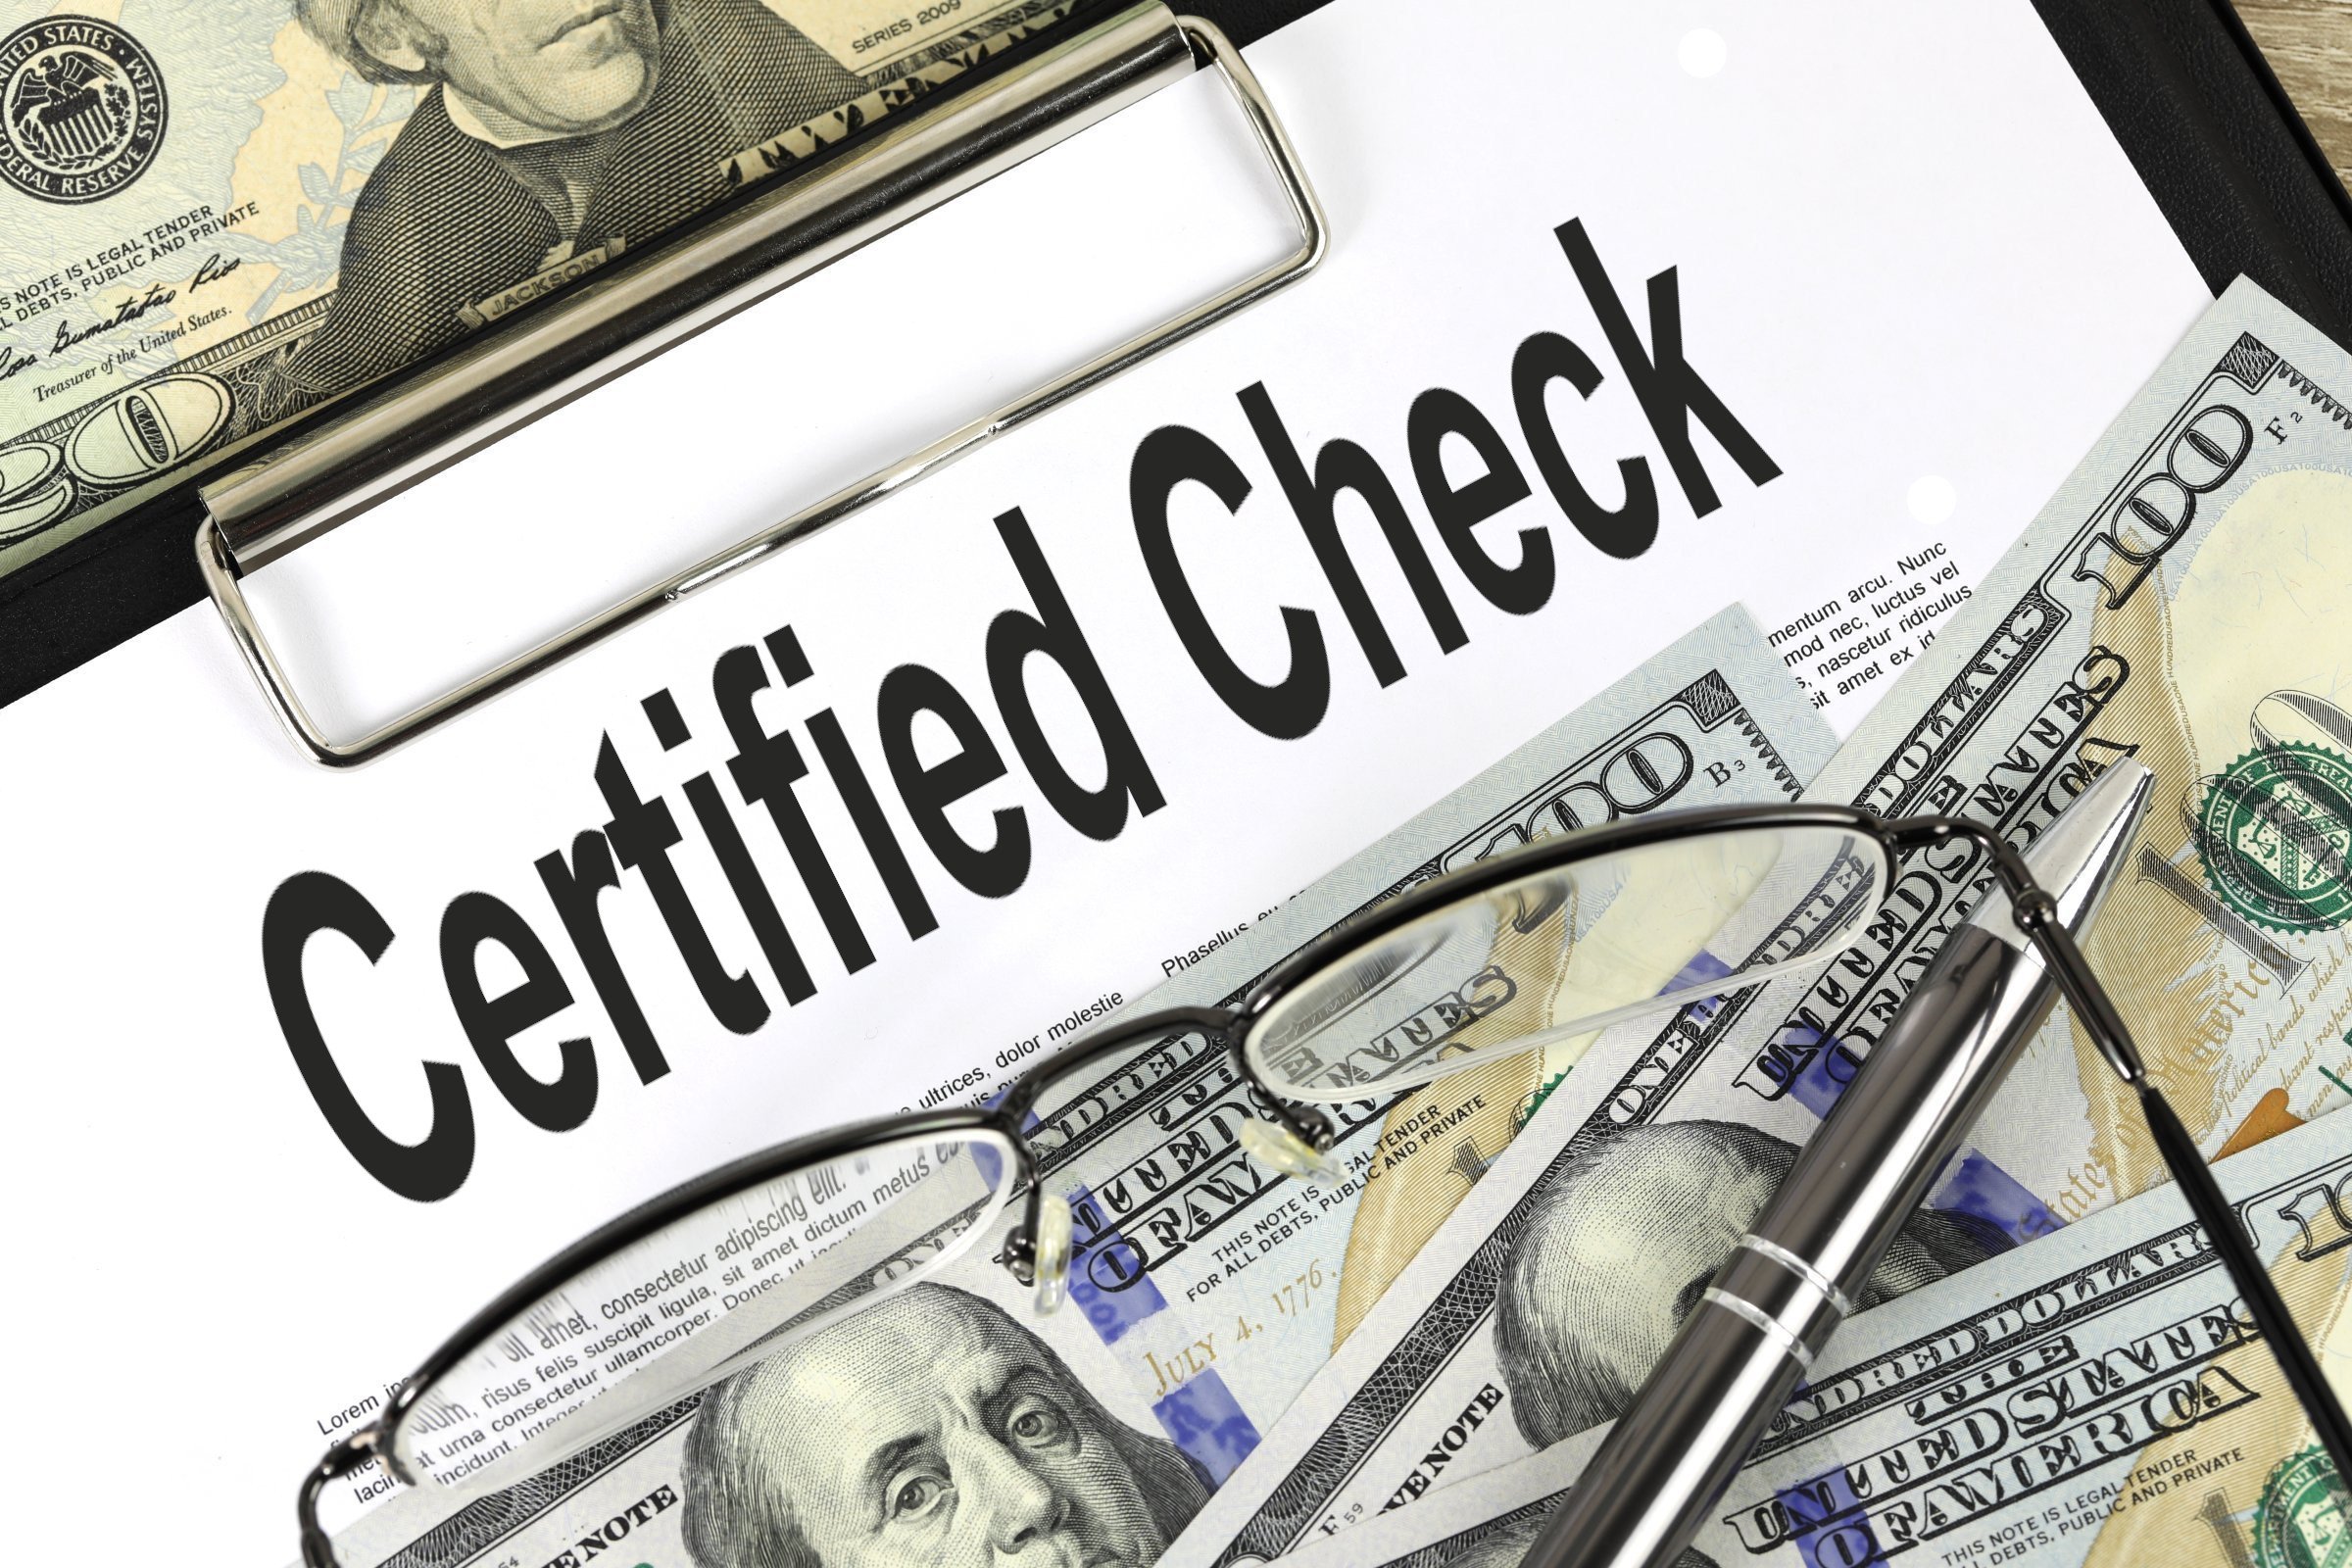 Certified Check - Free of Charge Creative Commons Financial 3 image